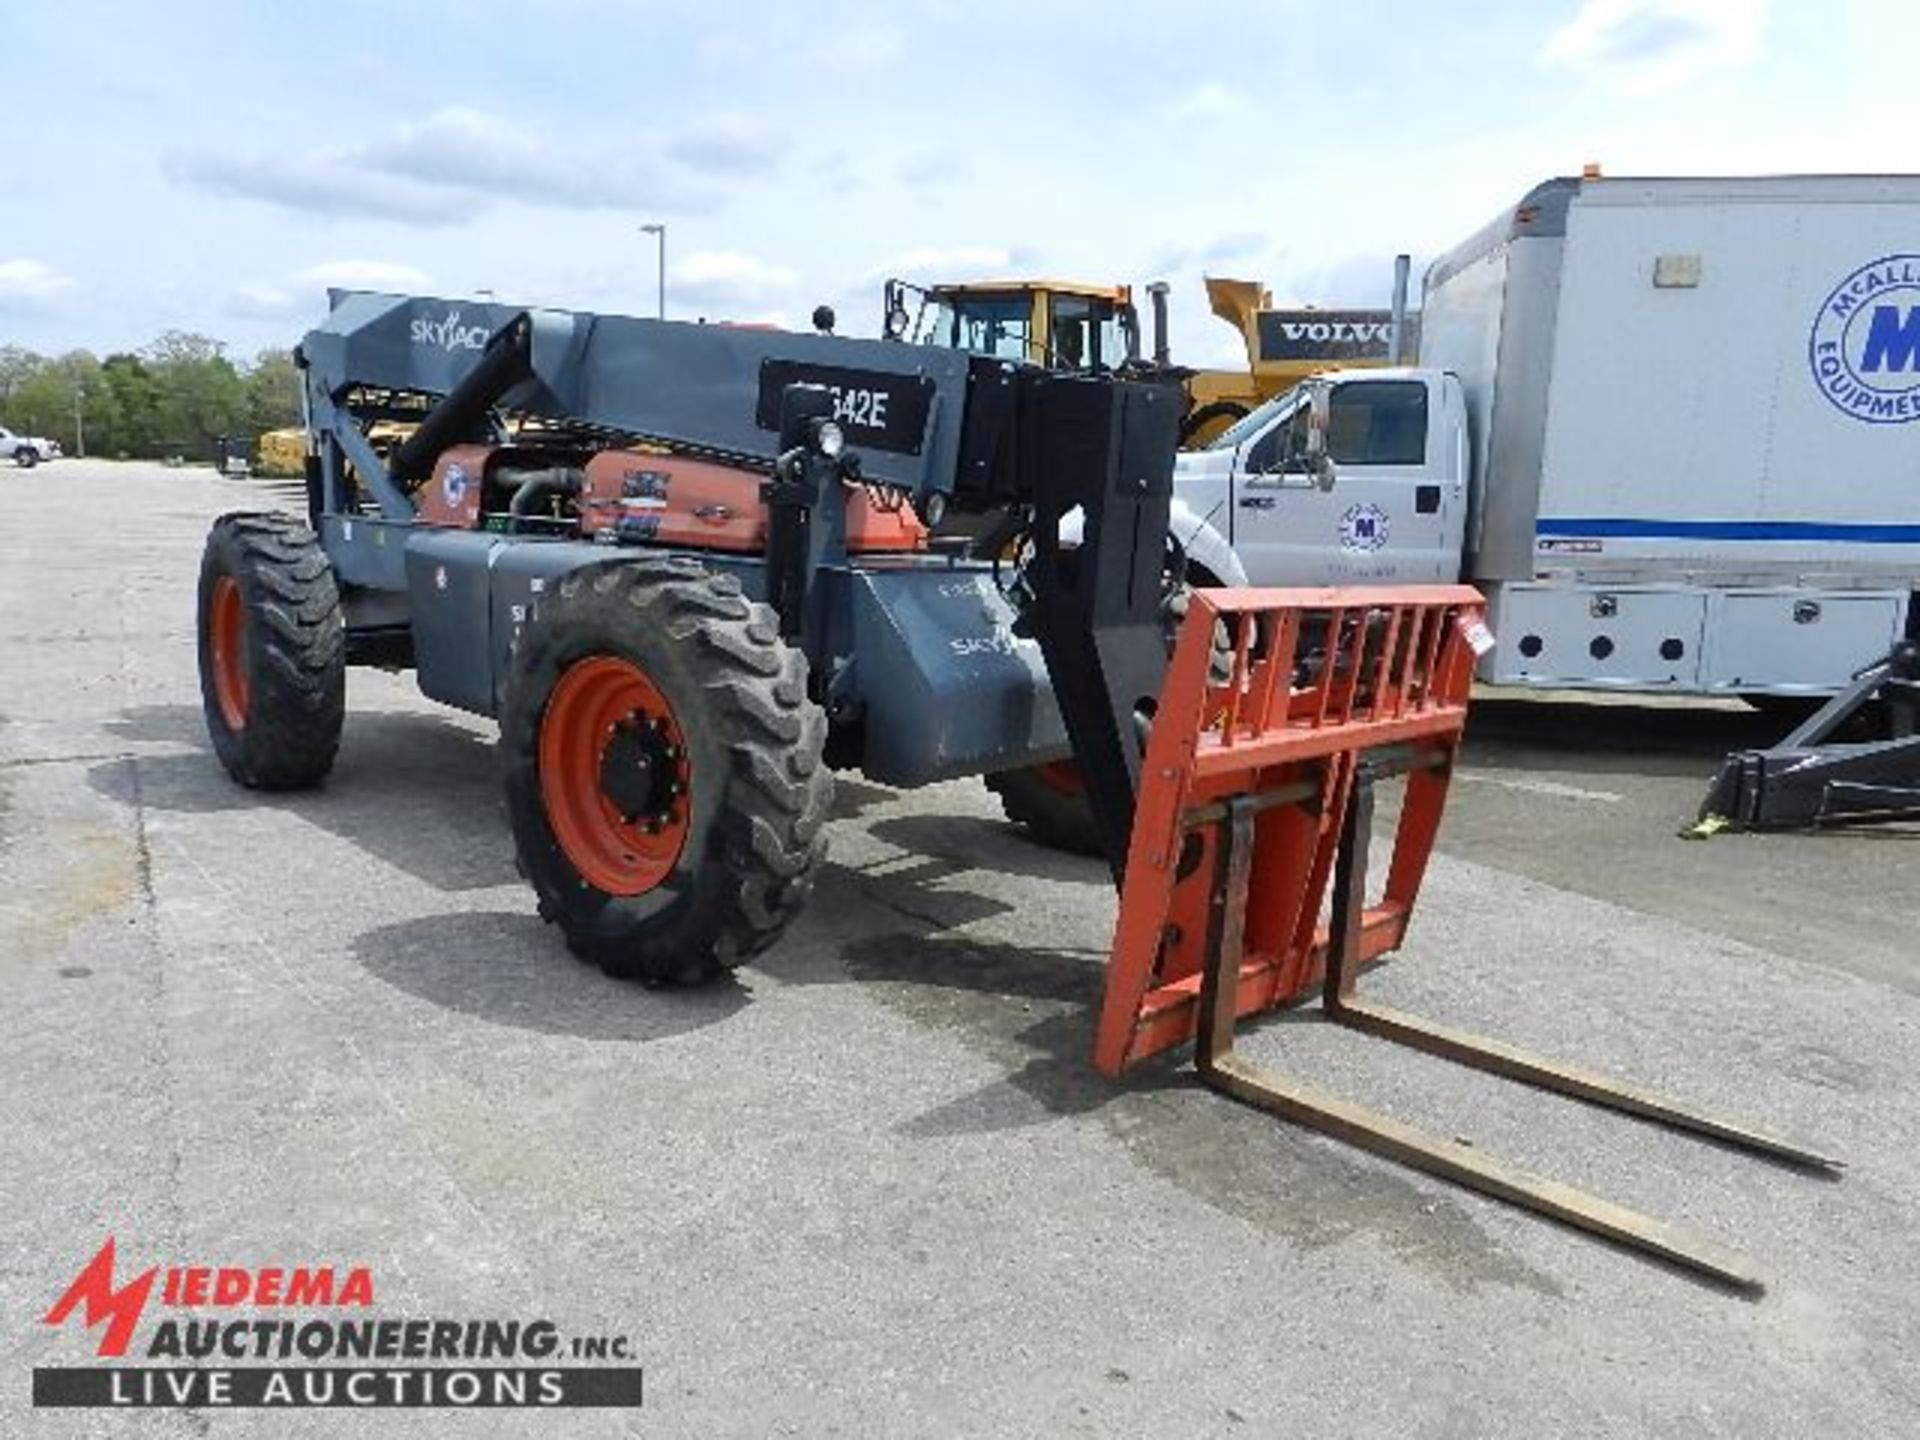 2014 SKYJACK VR-642E EXTENDED BOOM OFF TERRAIN FORKLIFT, 485 HOURS SHOWING, 6000 LB CAPACITY, 42' - Image 4 of 12